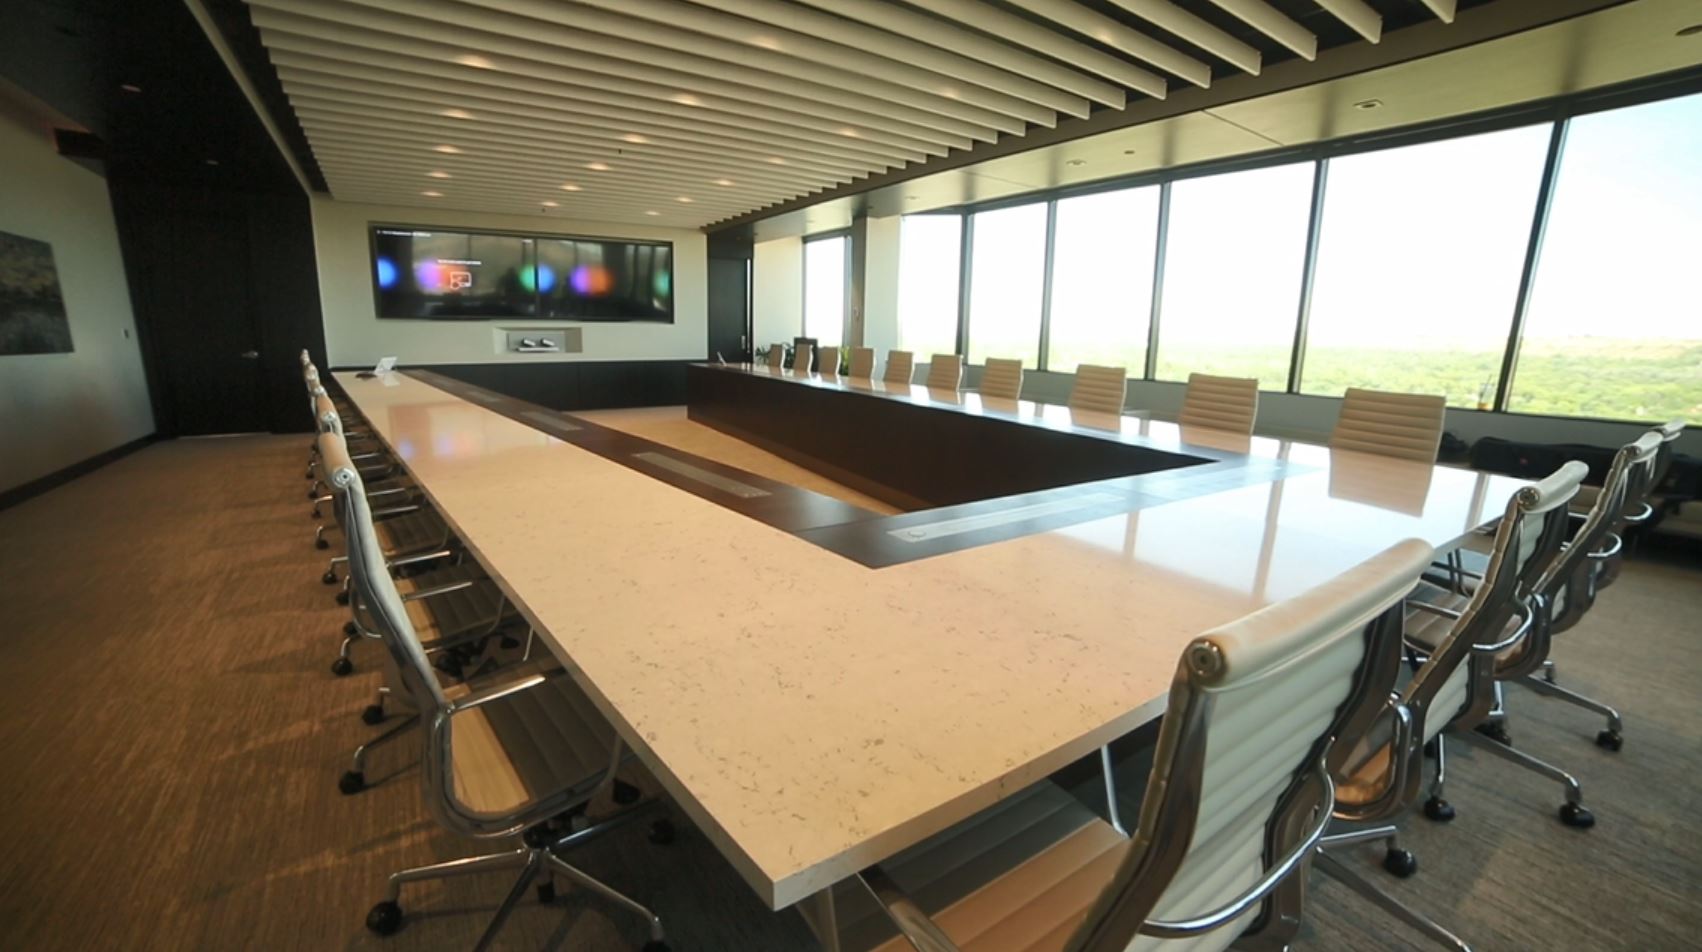 Bringing Better Technology to the Boardroom